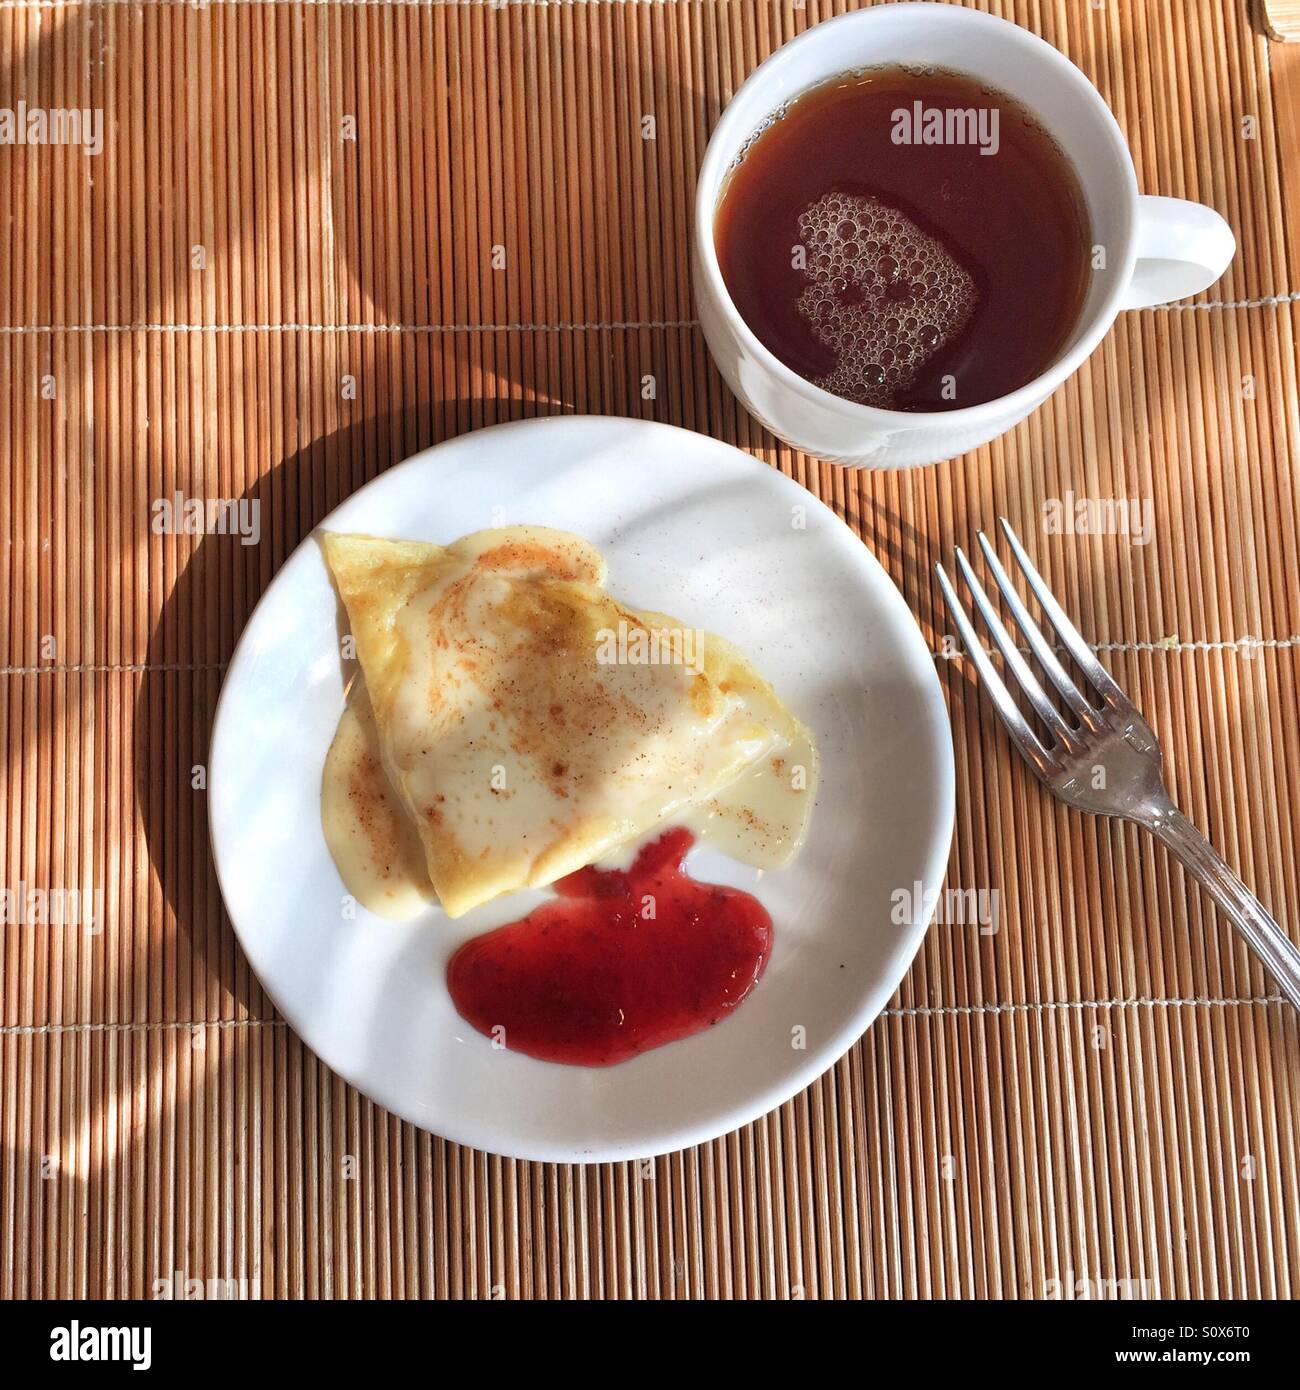 Crepes and tea Stock Photo